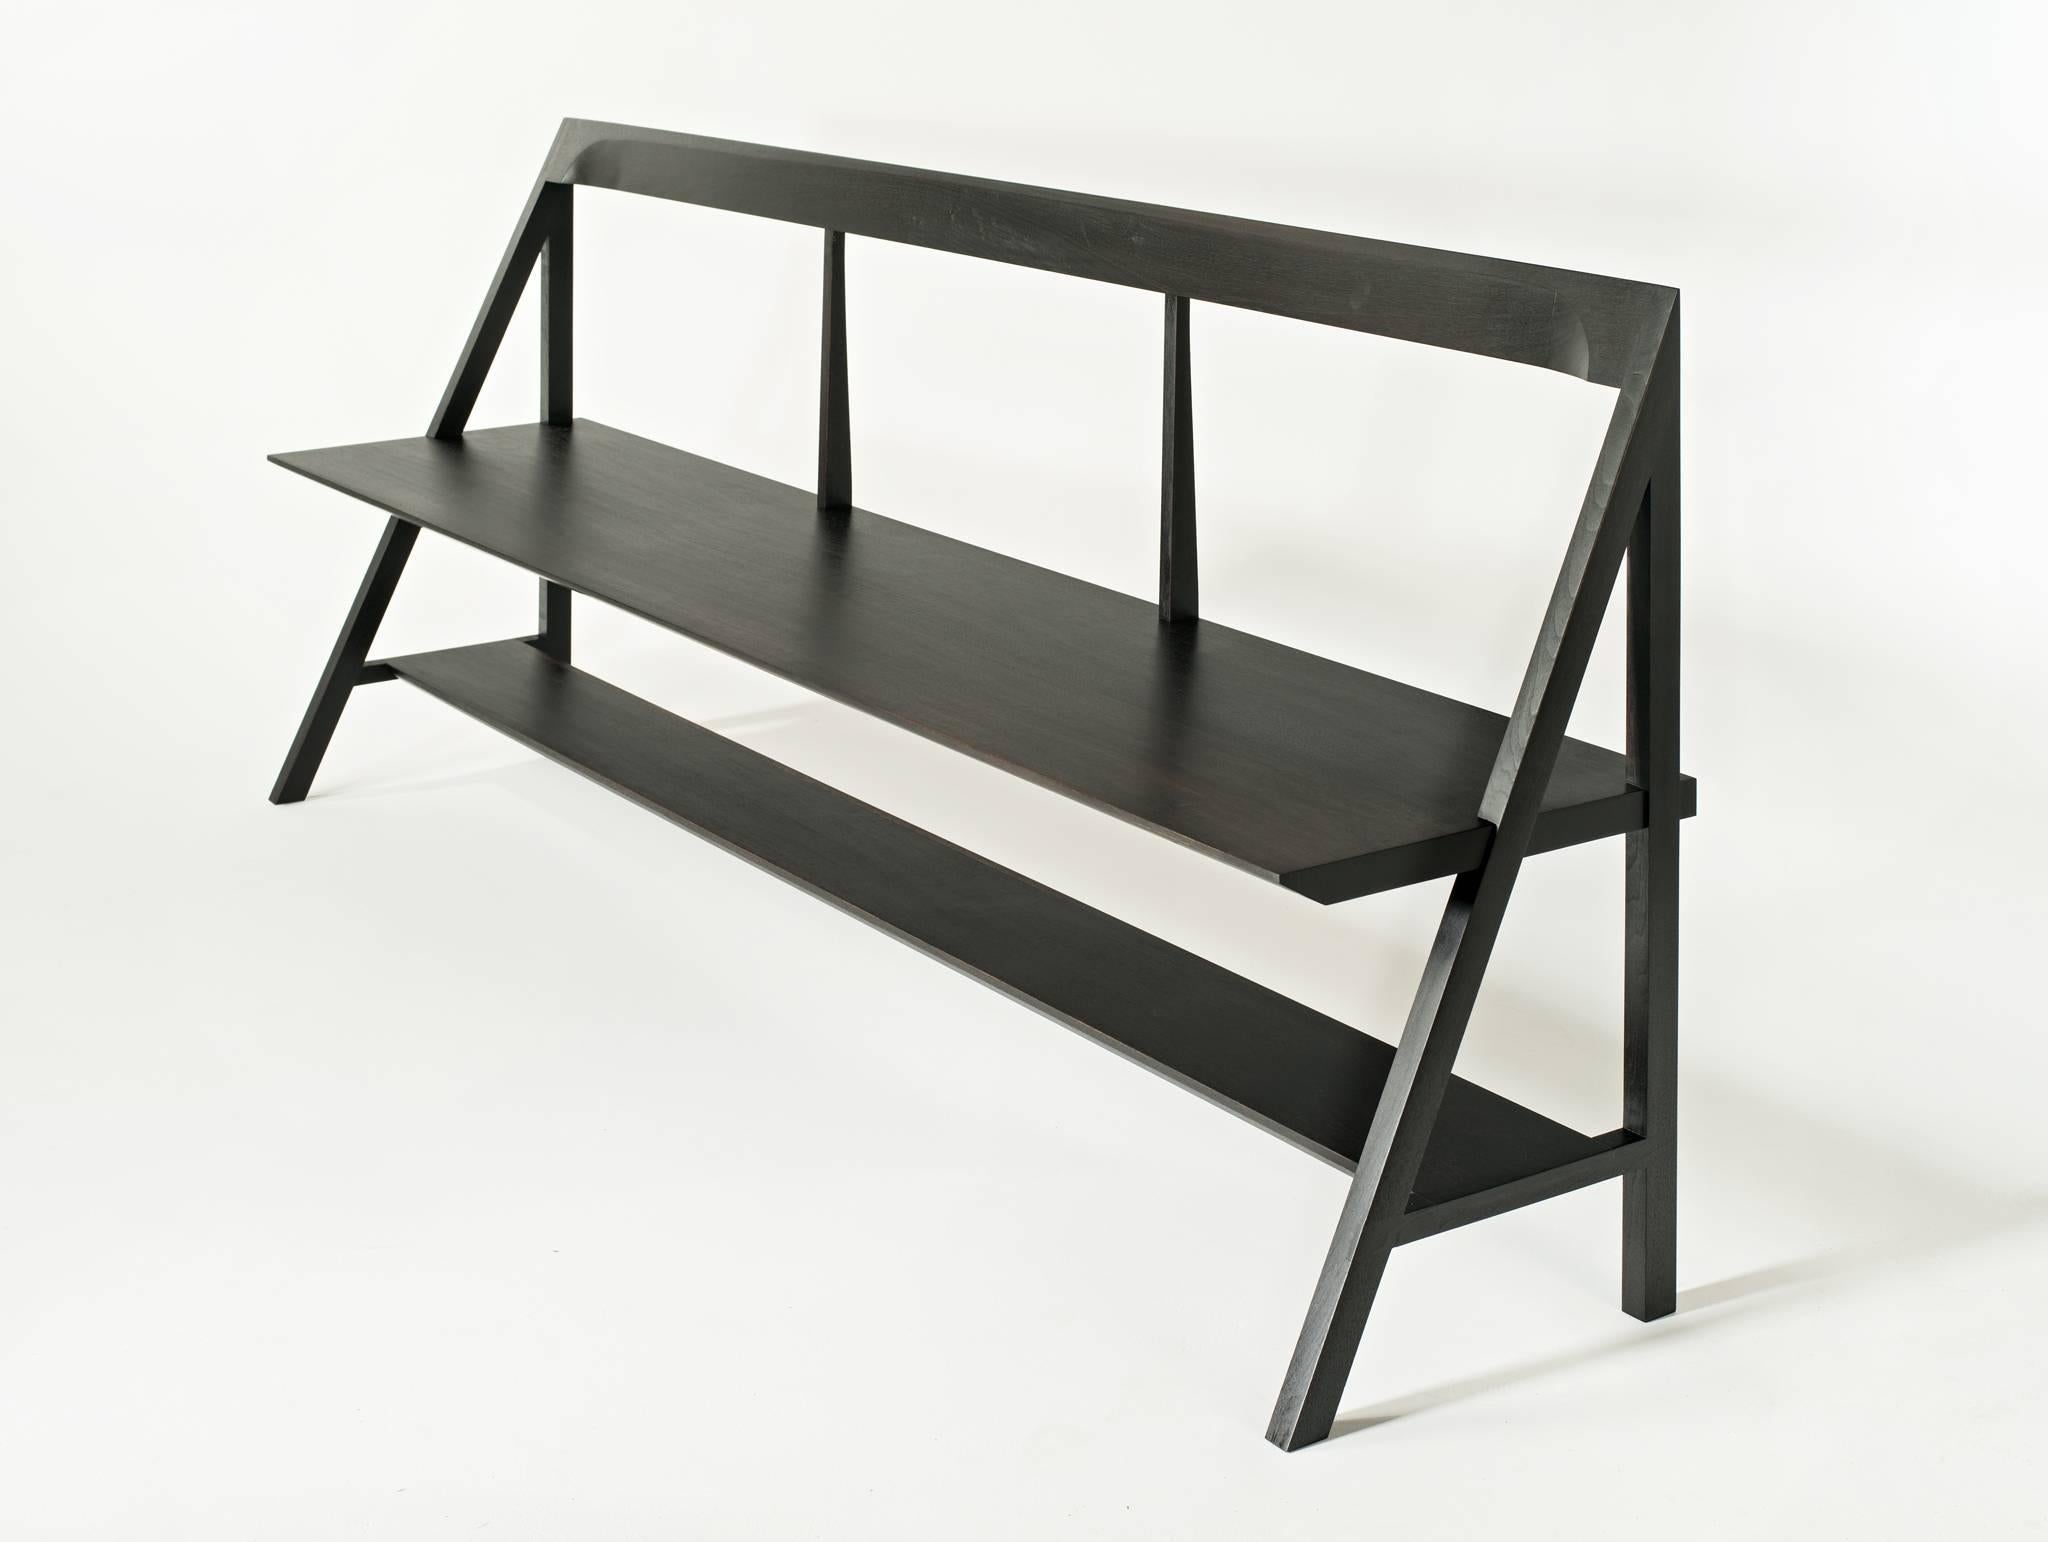 The cantilever bench is inspired by classic Bauhaus design.

The cantilever bench is a simplified form that blends rationality with functionality.

Originally envisioned as an entryway piece, the shelf below provides a practical means of storage